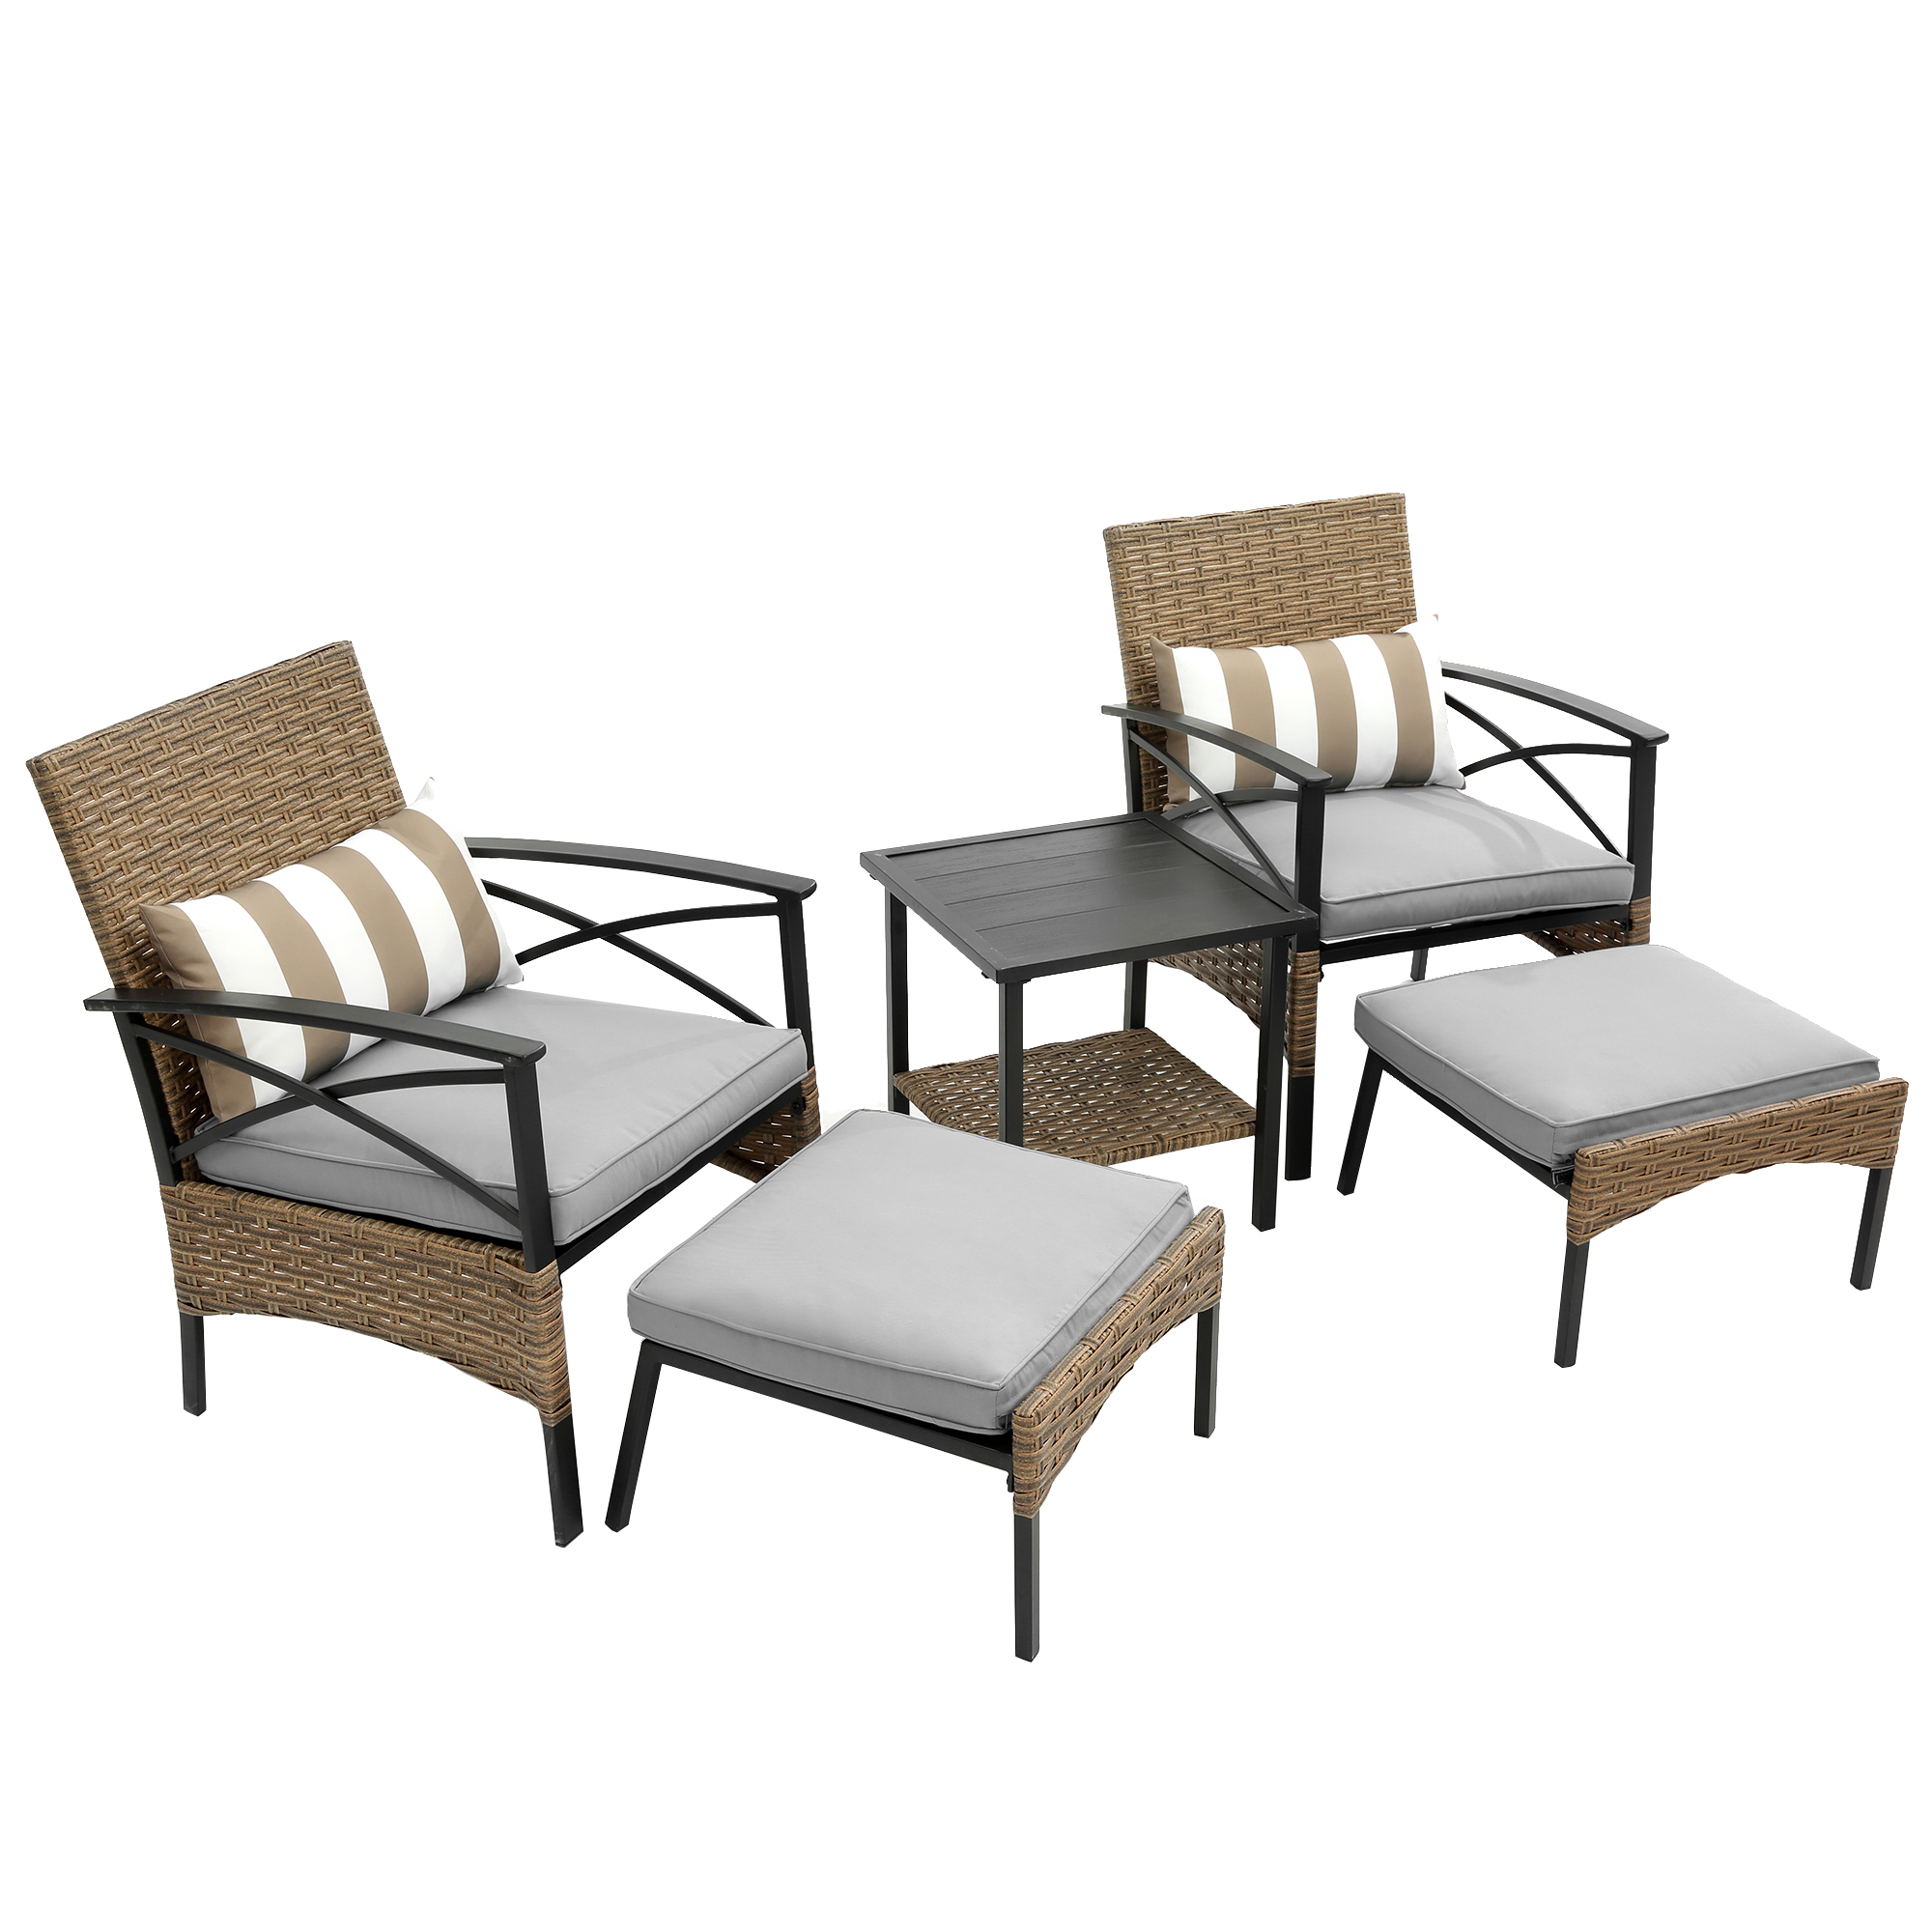 Patio Outdoor Furniture Chair Set, 5 PCS Wicker Sectional Sofa Set, Garden Conversation Set with 2 Cushioned Chairs, 2 Footstools & Tea Table, Lawn Pool Balcony Deck Yard Porch Chat Set - image 3 of 9